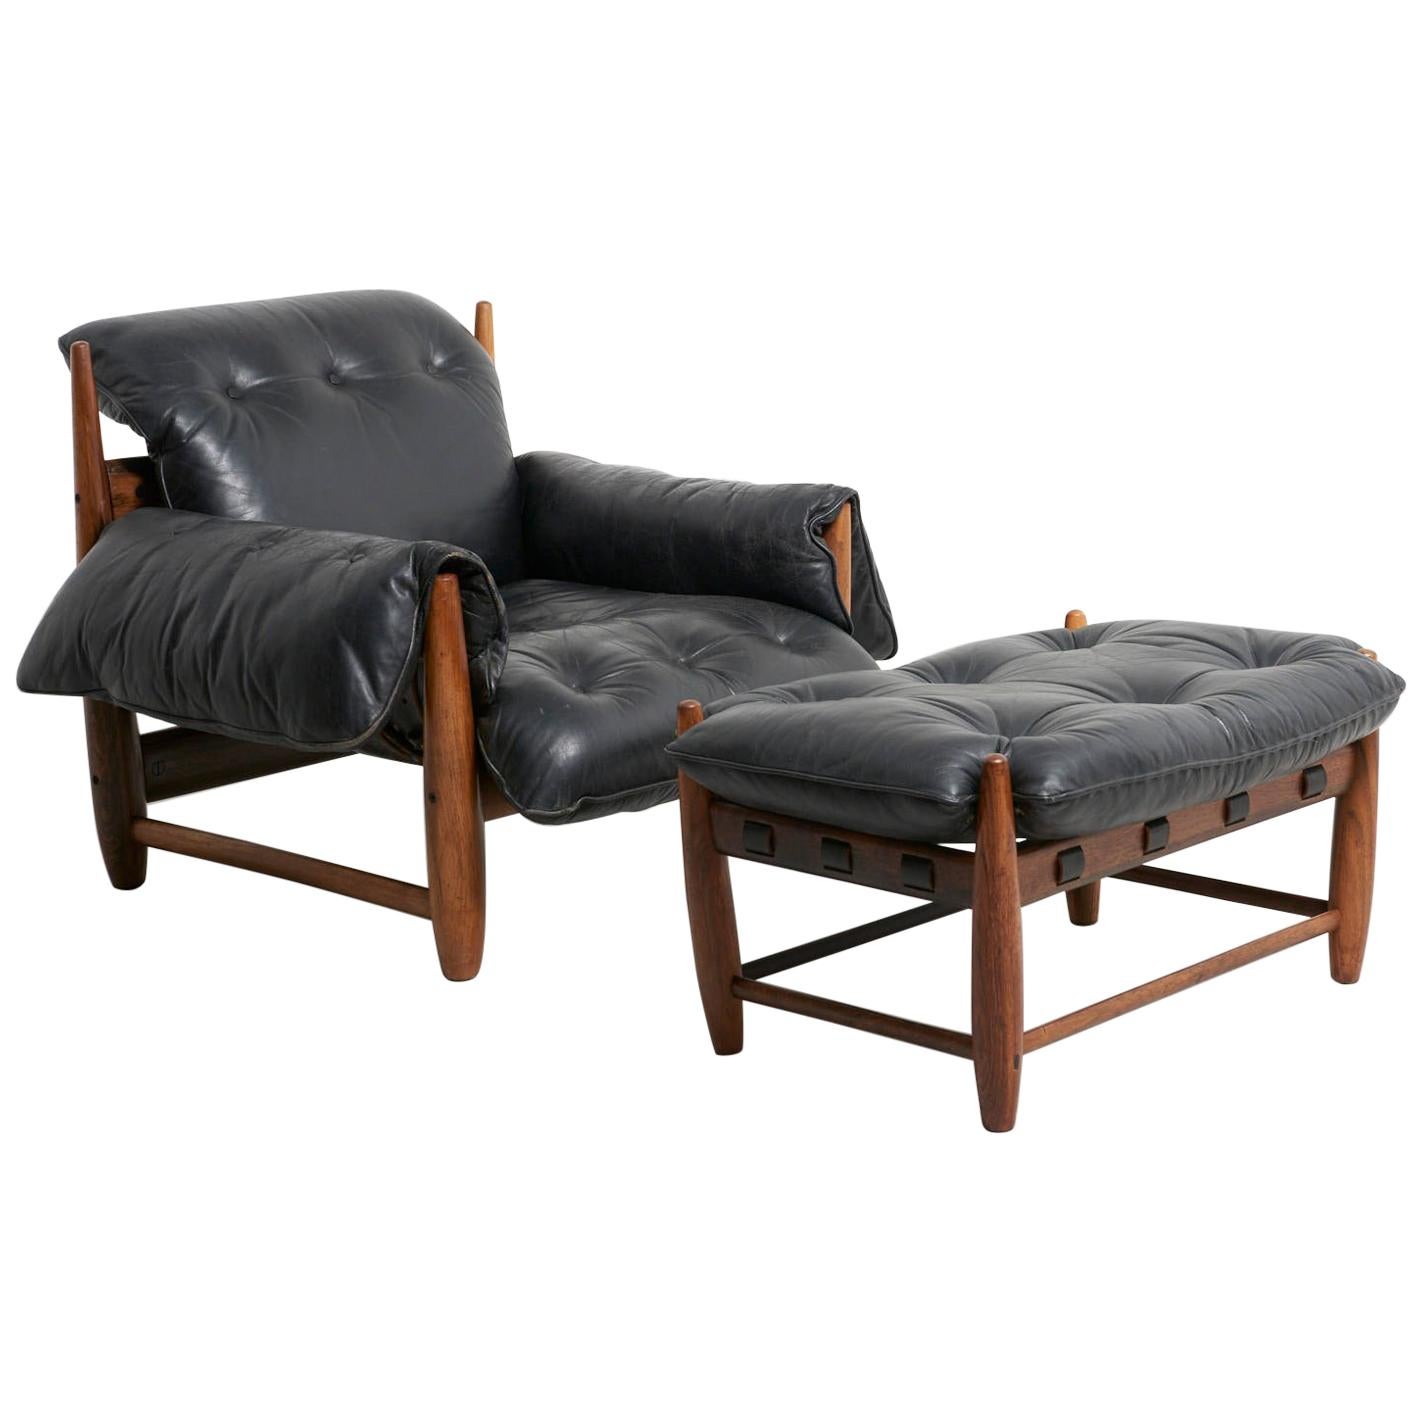 'Mole' Chair with Ottoman by Sergio Rodrigues For Sale